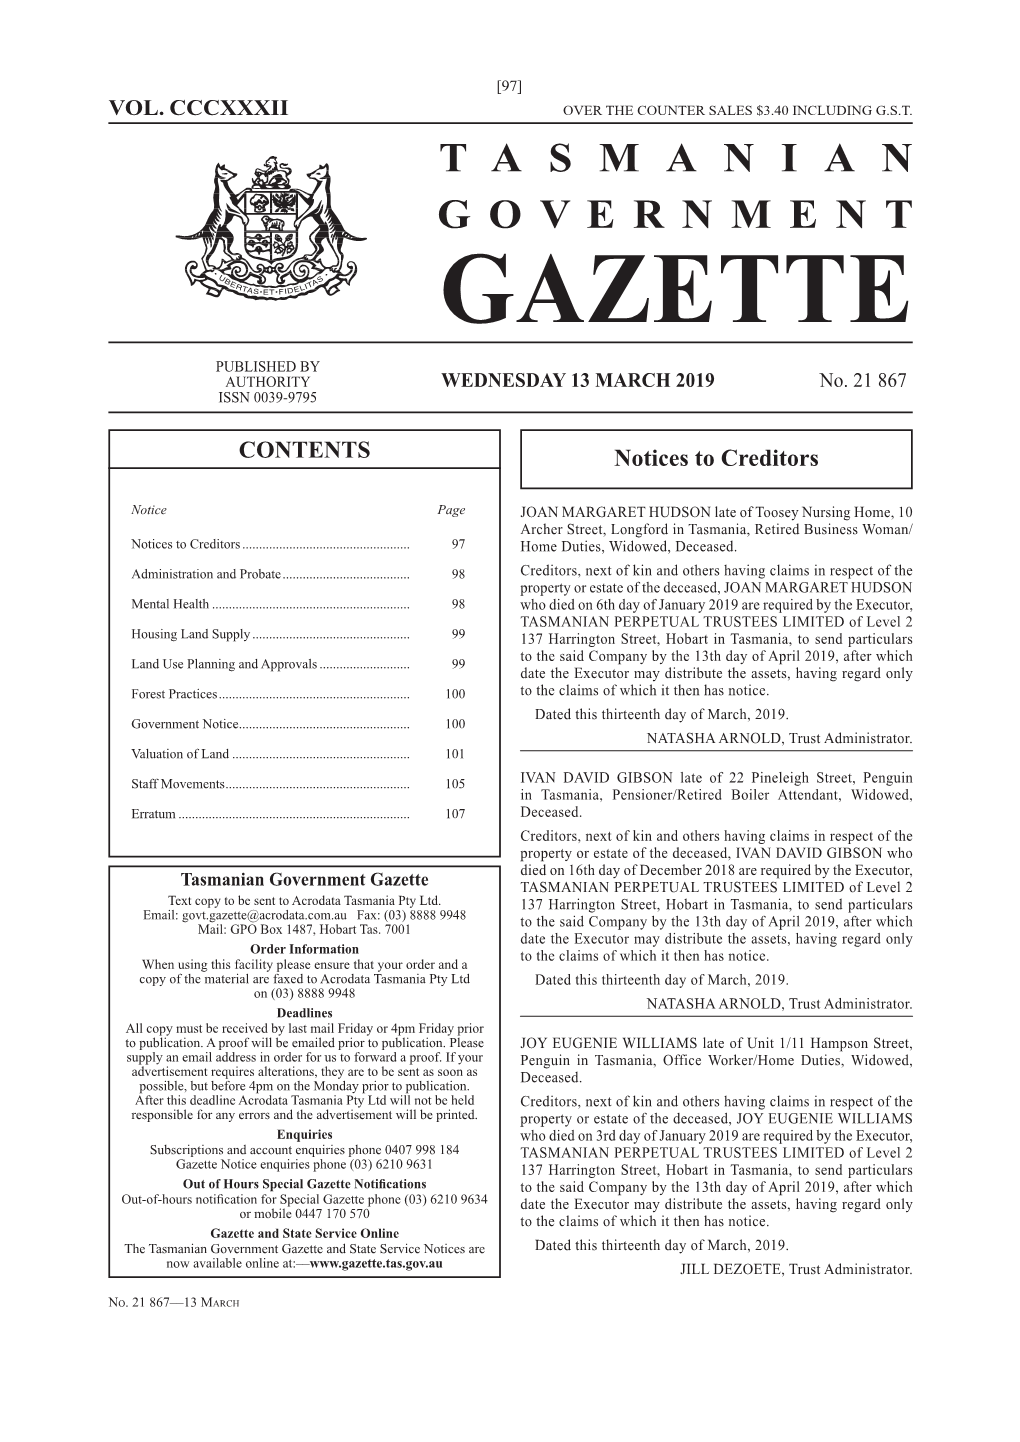 GAZETTE PUBLISHED by AUTHORITY WEDNESDAY 13 MARCH 2019 No